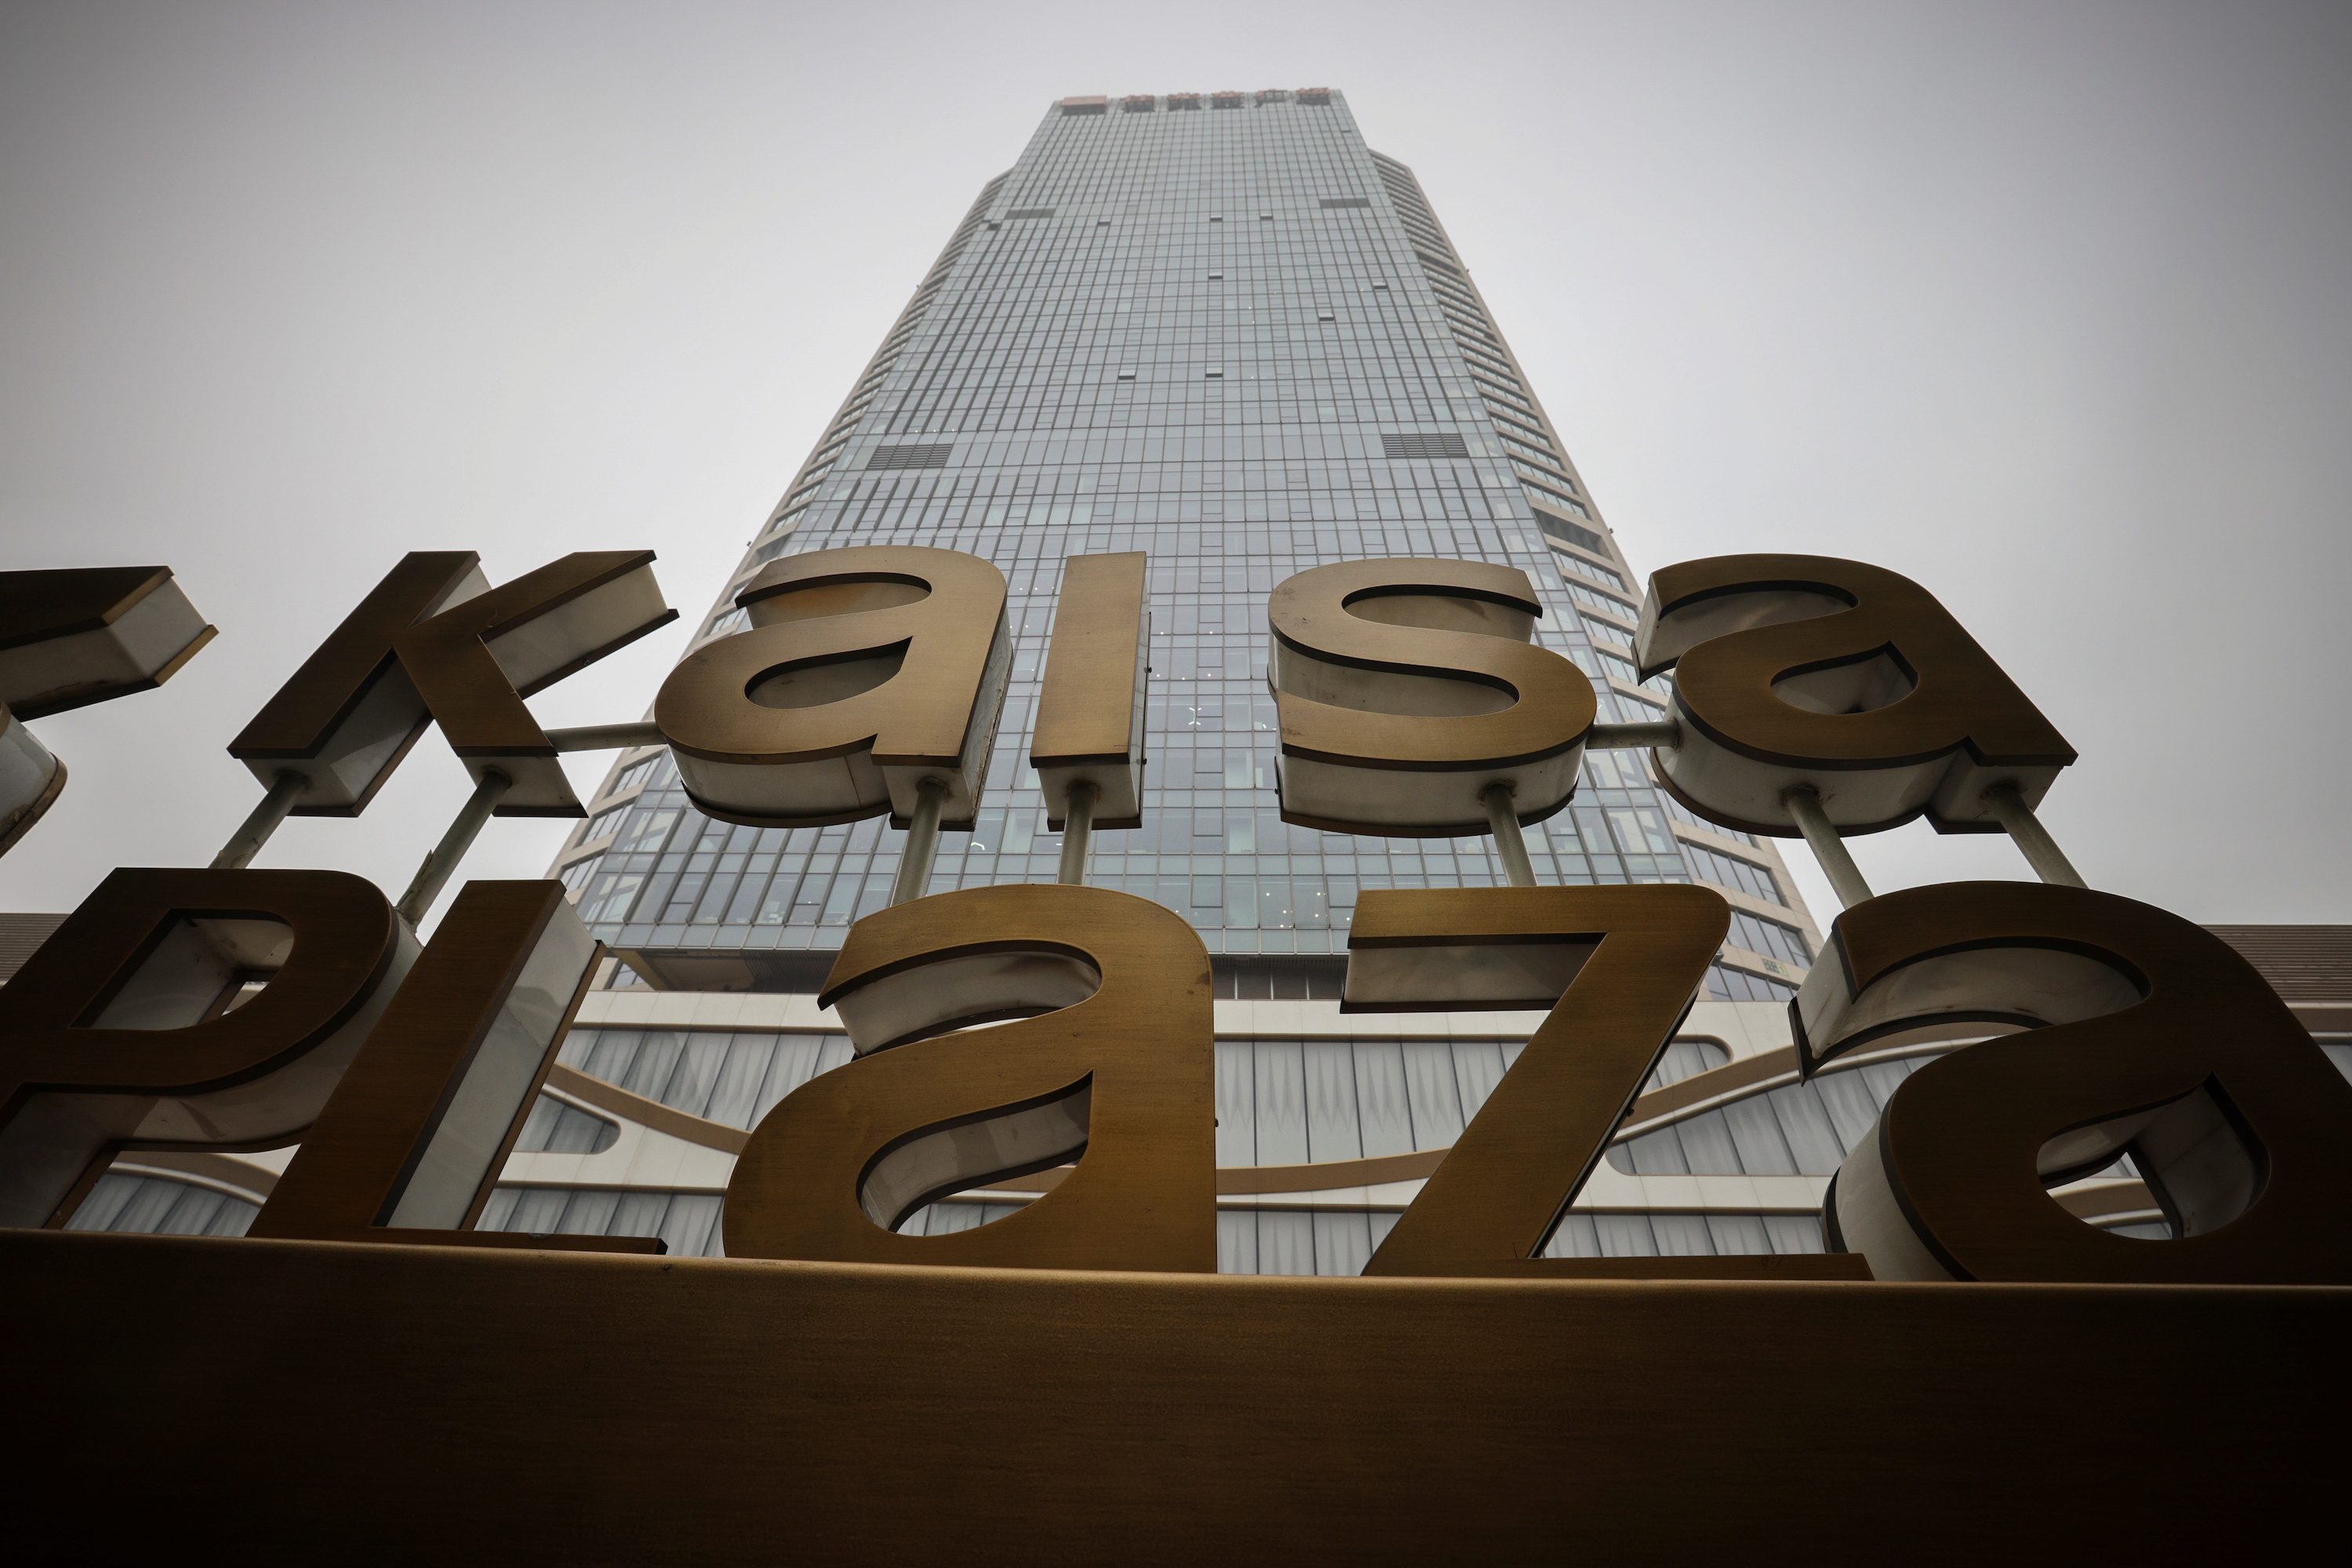 China developer Kaisa pleads for help, ‘patience’ as sector’s debt woes mount